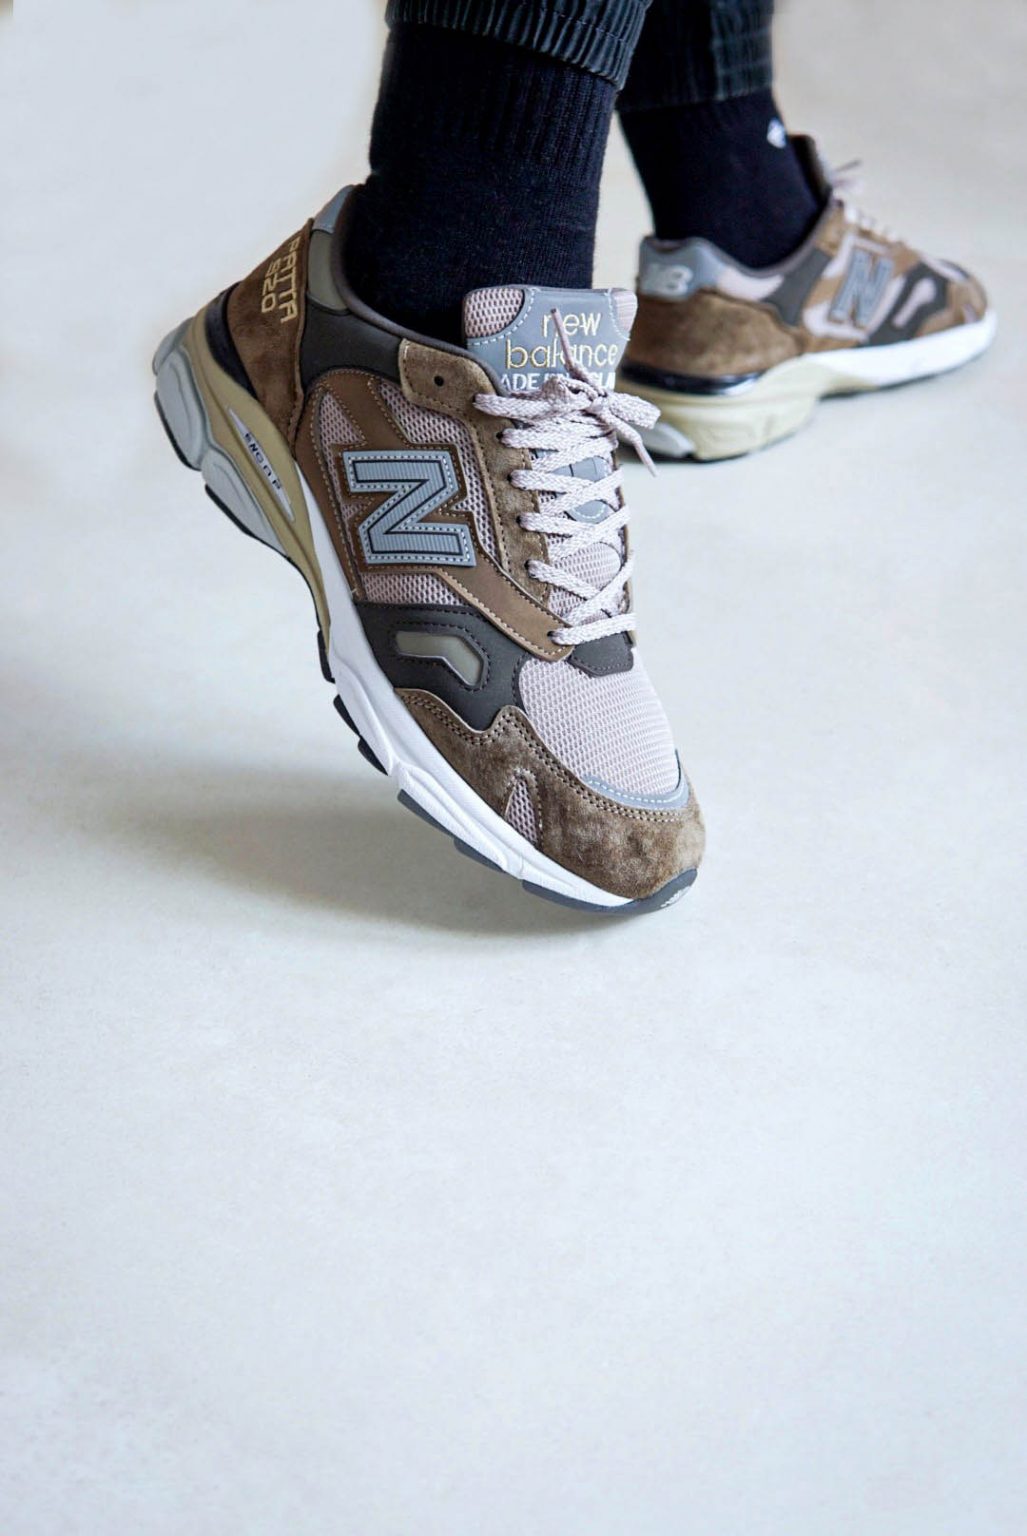 WOMFT? Review - New Balance x Patta 920 - WOMFT? - What's On My Feet ...